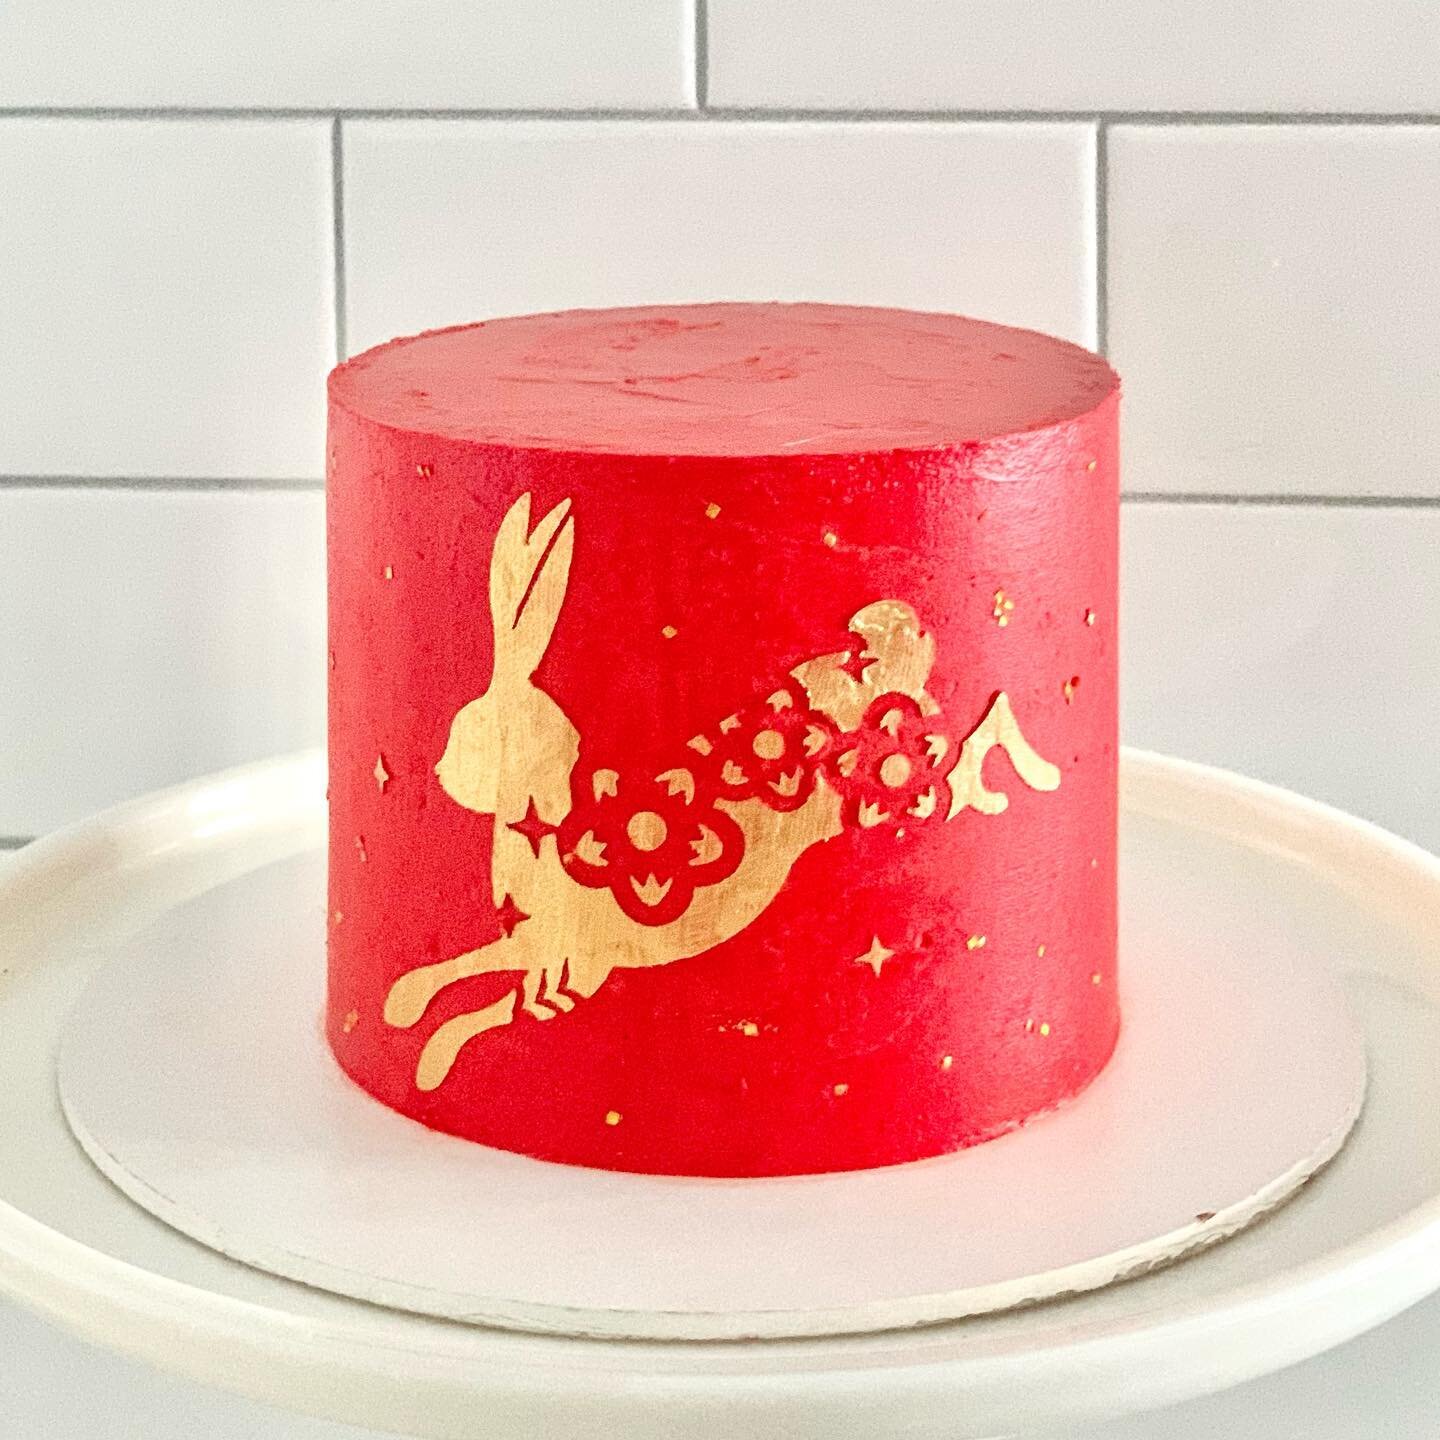 Happy New Year 2023 - Year of the Rabbit!

[UPDATE: LUNAR NEW YEAR CAKES ARE SOLD OUT!]

This month Sweet Orange Bakes will be offering limited edition mini cakes for Lunar New Year! Flavors and designs are inspired by the holiday and 100% of proceed